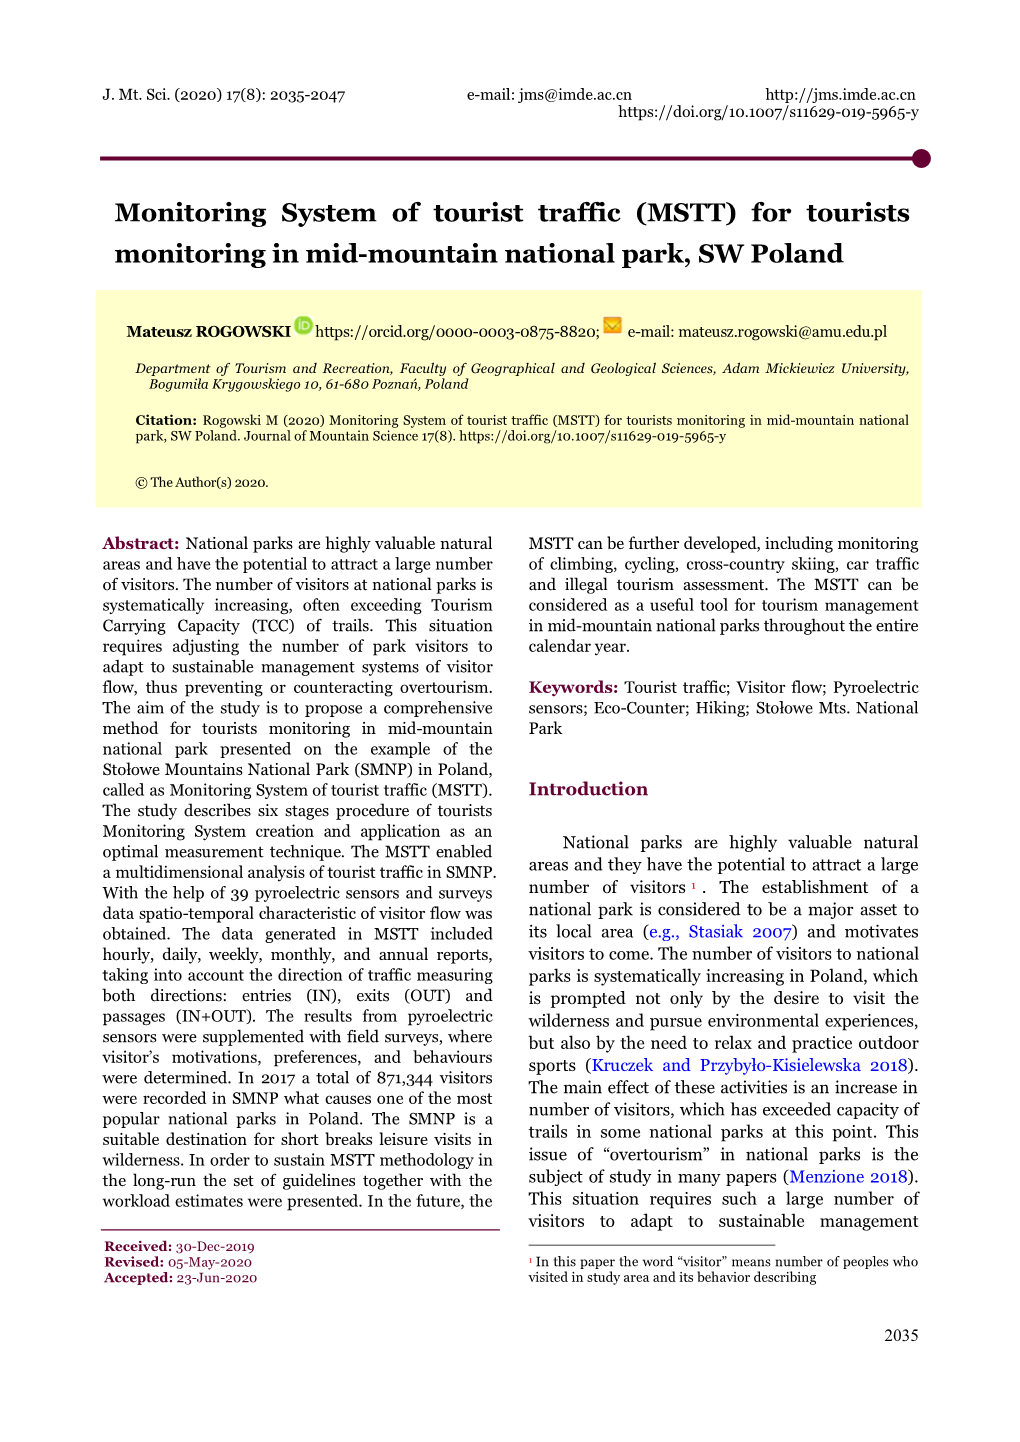 (MSTT) for Tourists Monitoring in Mid-Mountain National Park, SW Poland